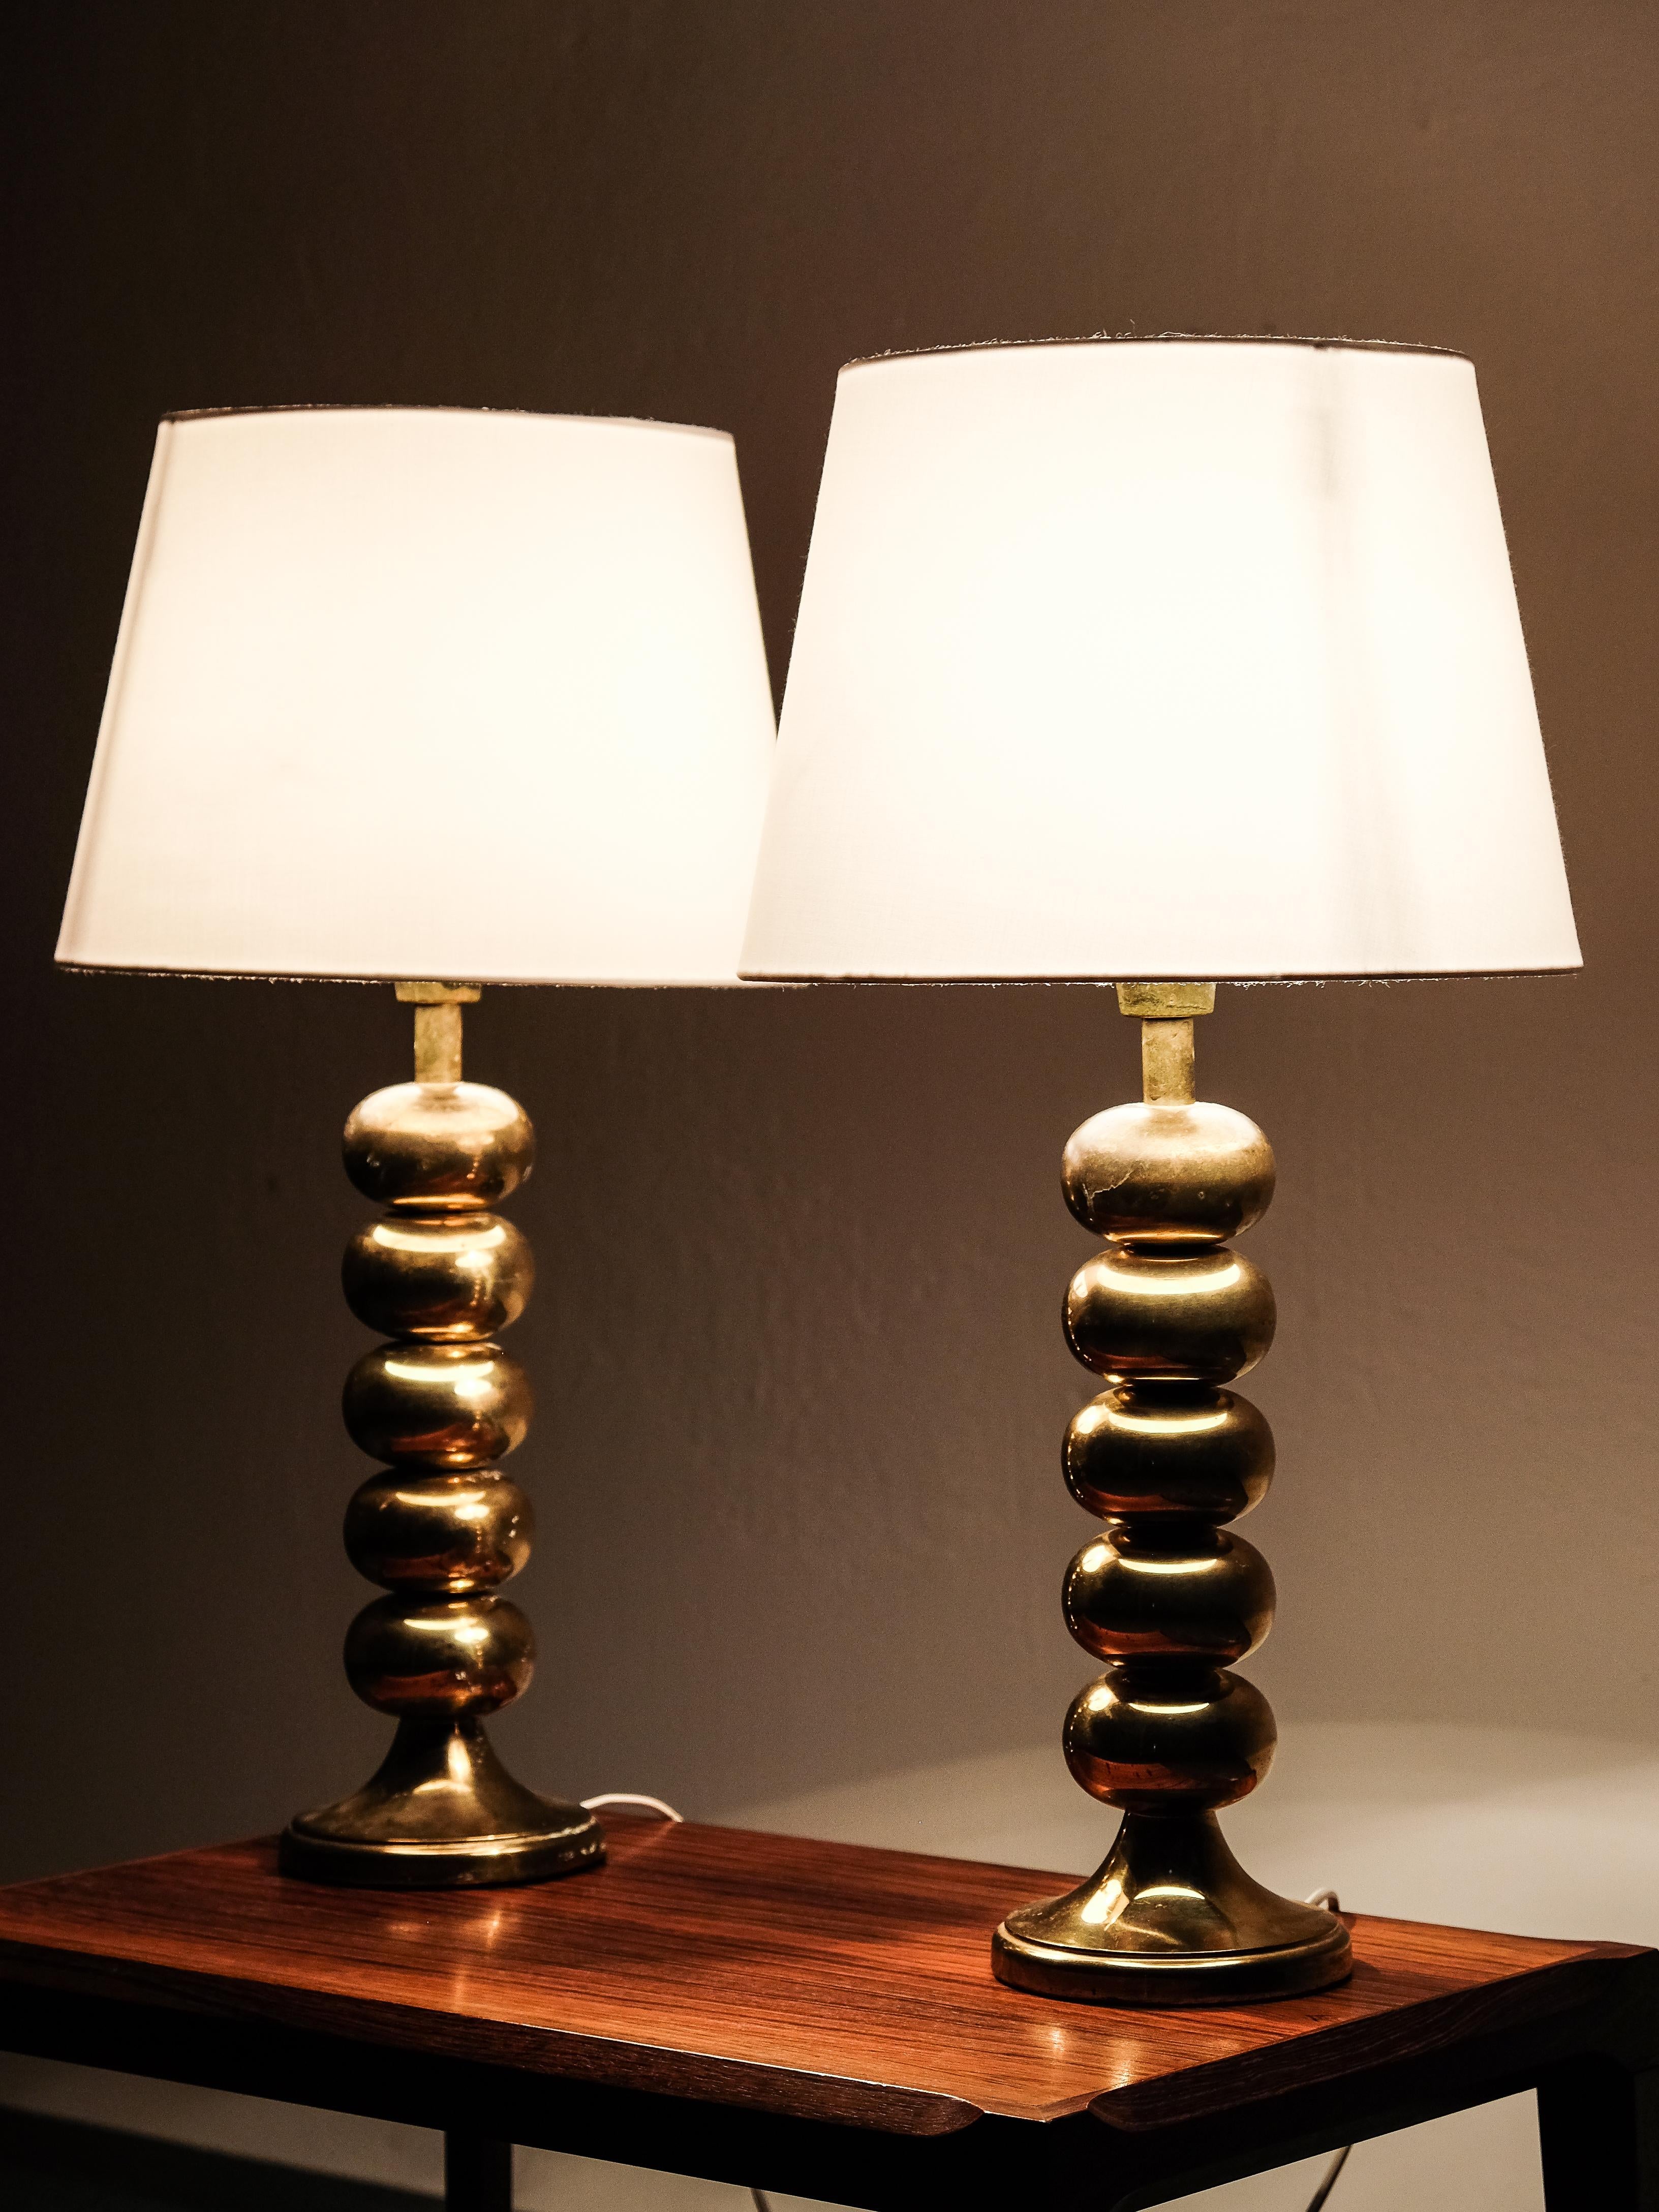 Mid-20th Century Pair of Brass Table Lamps by Uno Dahlén for Aneta, Sweden, 1960s